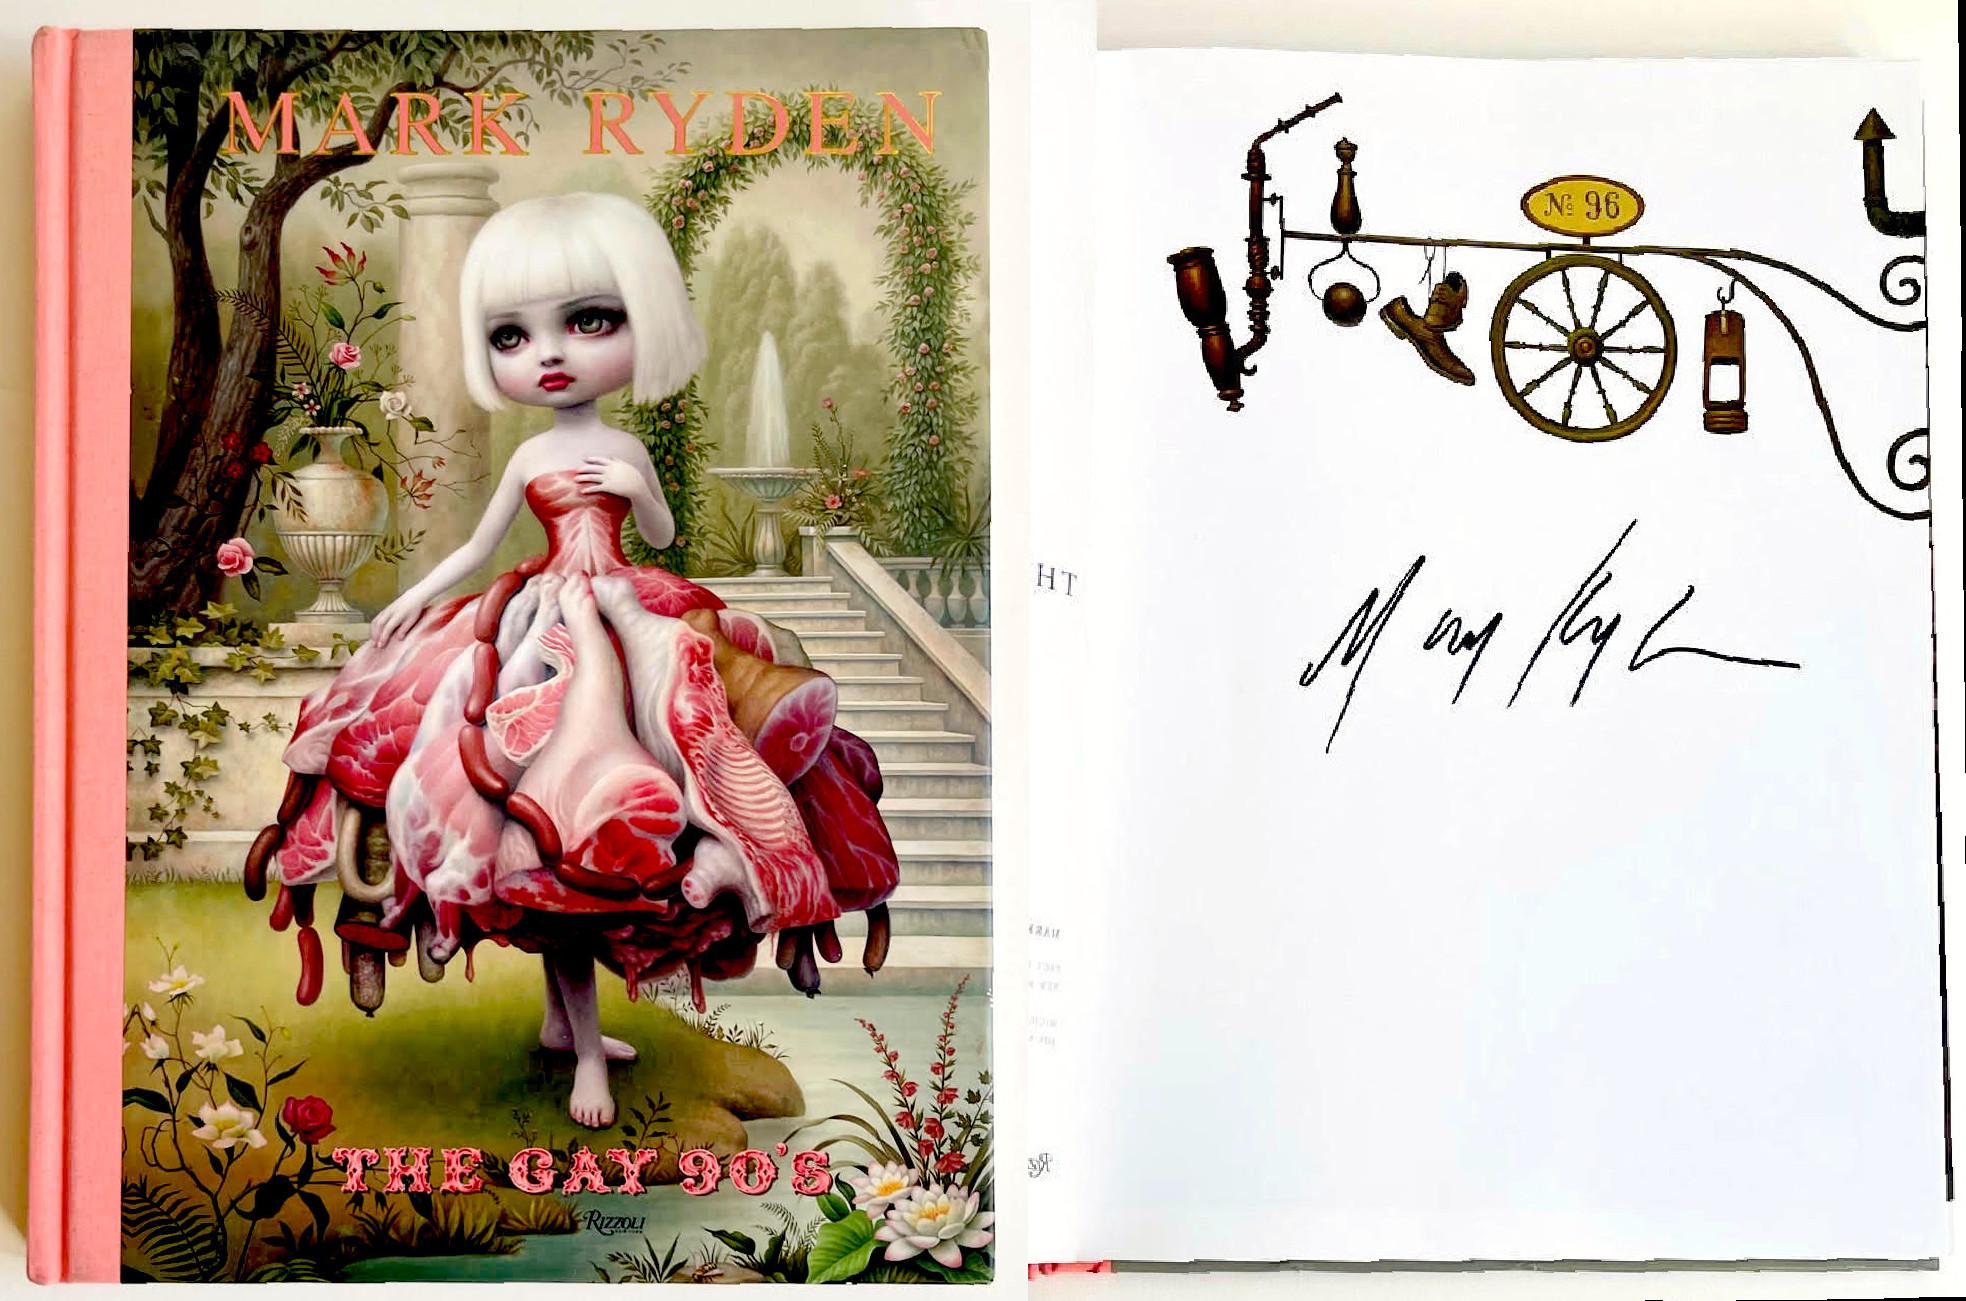 Hardback monograph: The Gay 90's (Hand signed by Mark Ryden)